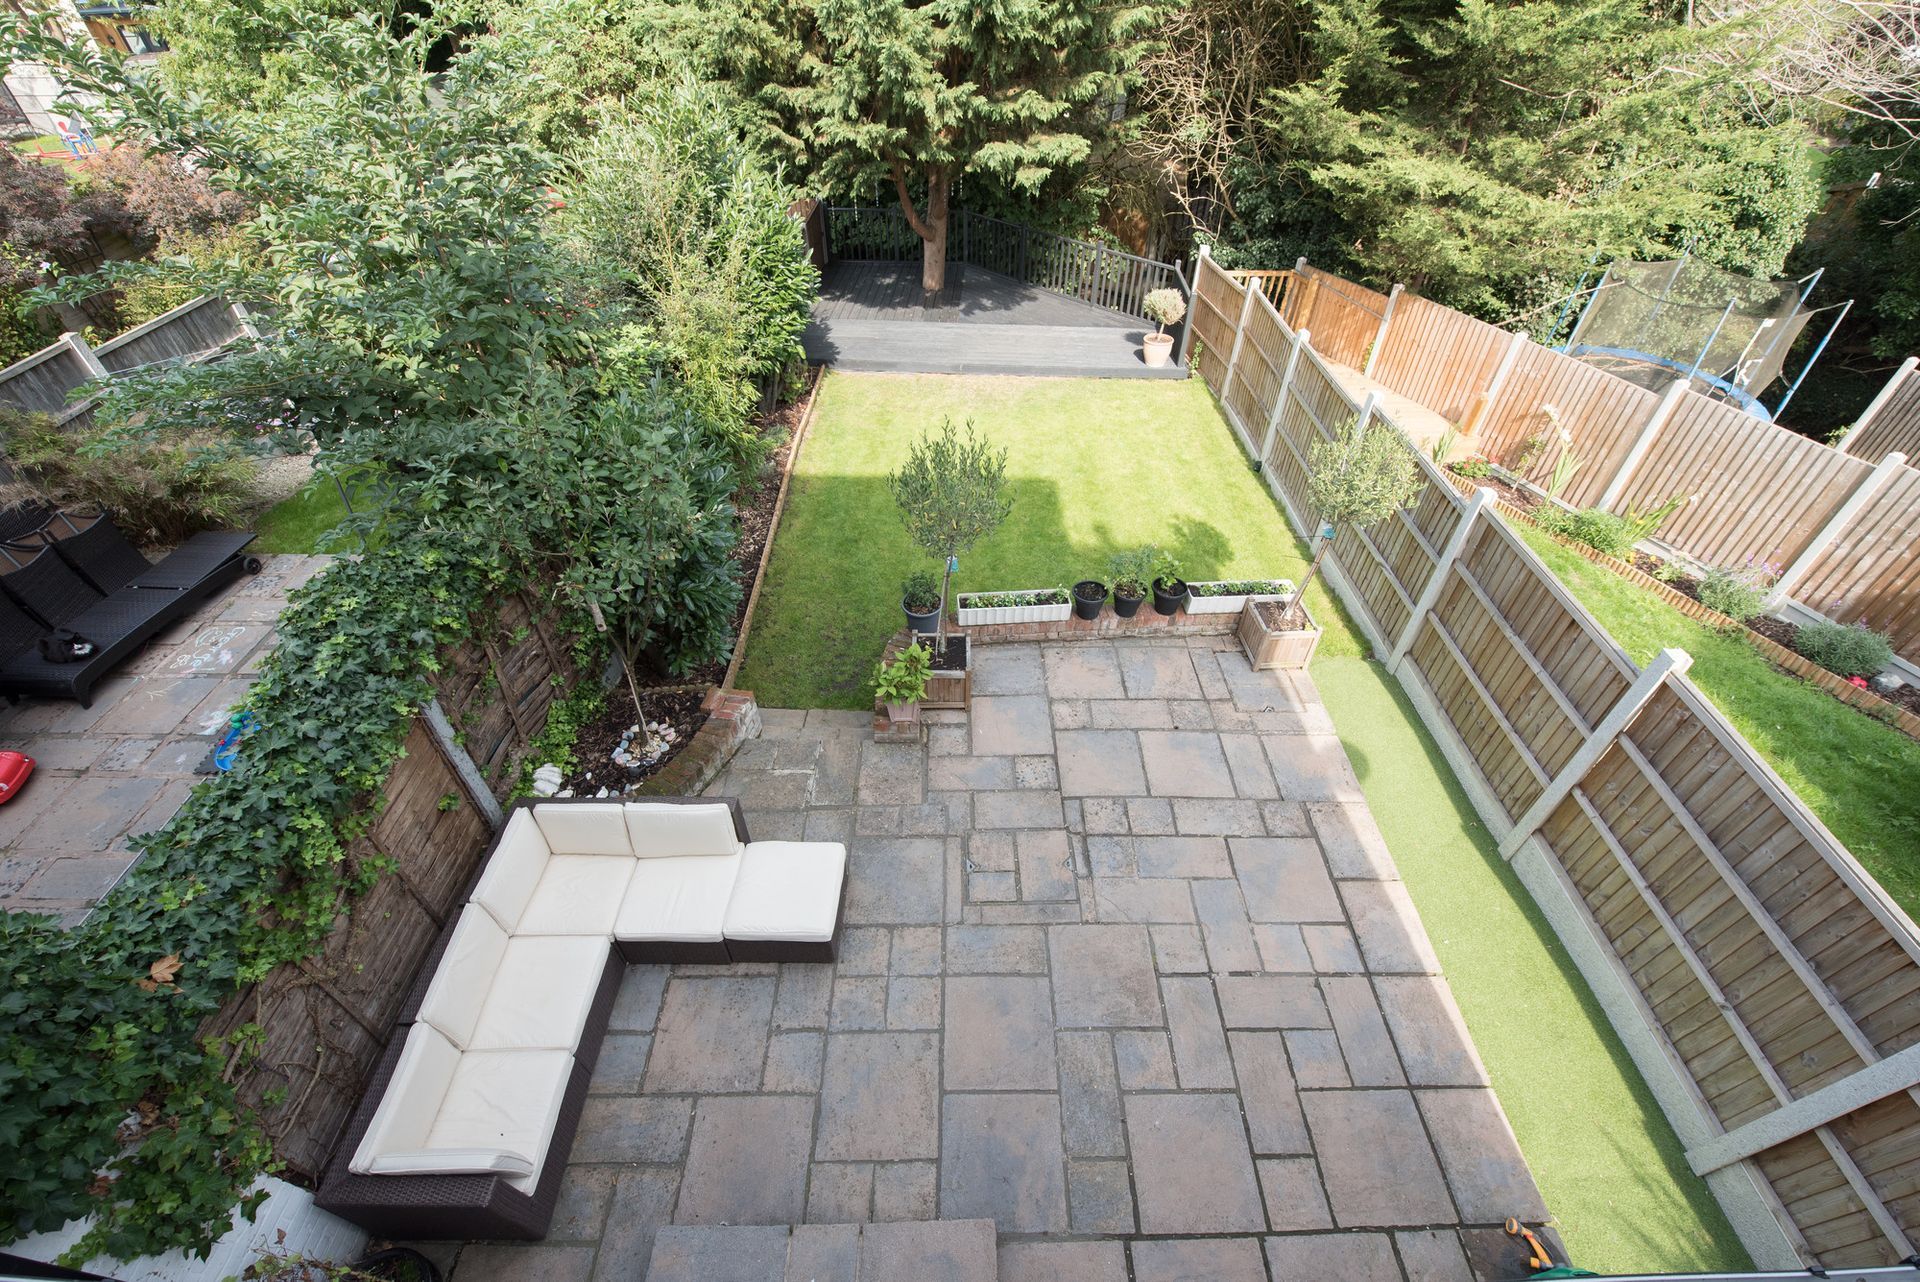 A general view of garden furniture in a back garden with patio and decking area